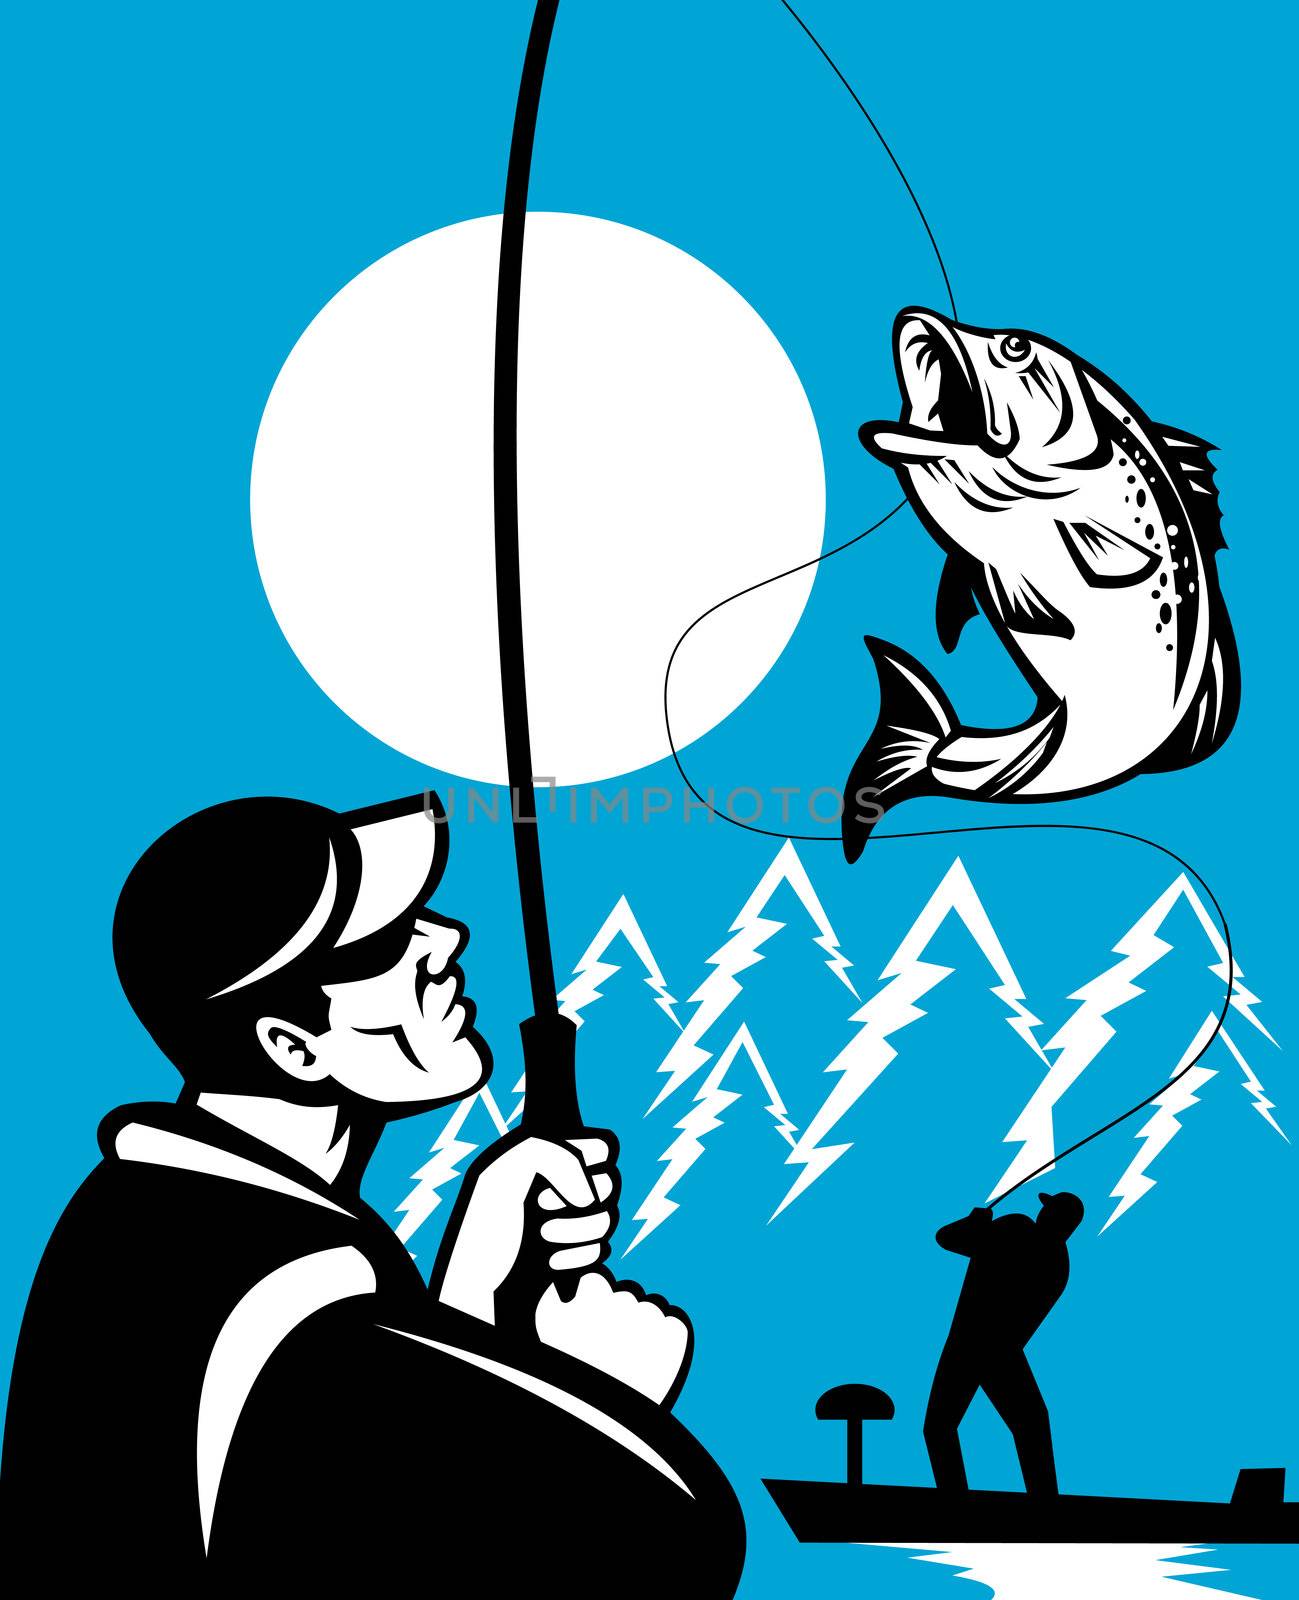 illustration of a Largemouth Bass Fish jumping being reeled by Fly Fisherman on bass boat with Fishing rod done in retro style